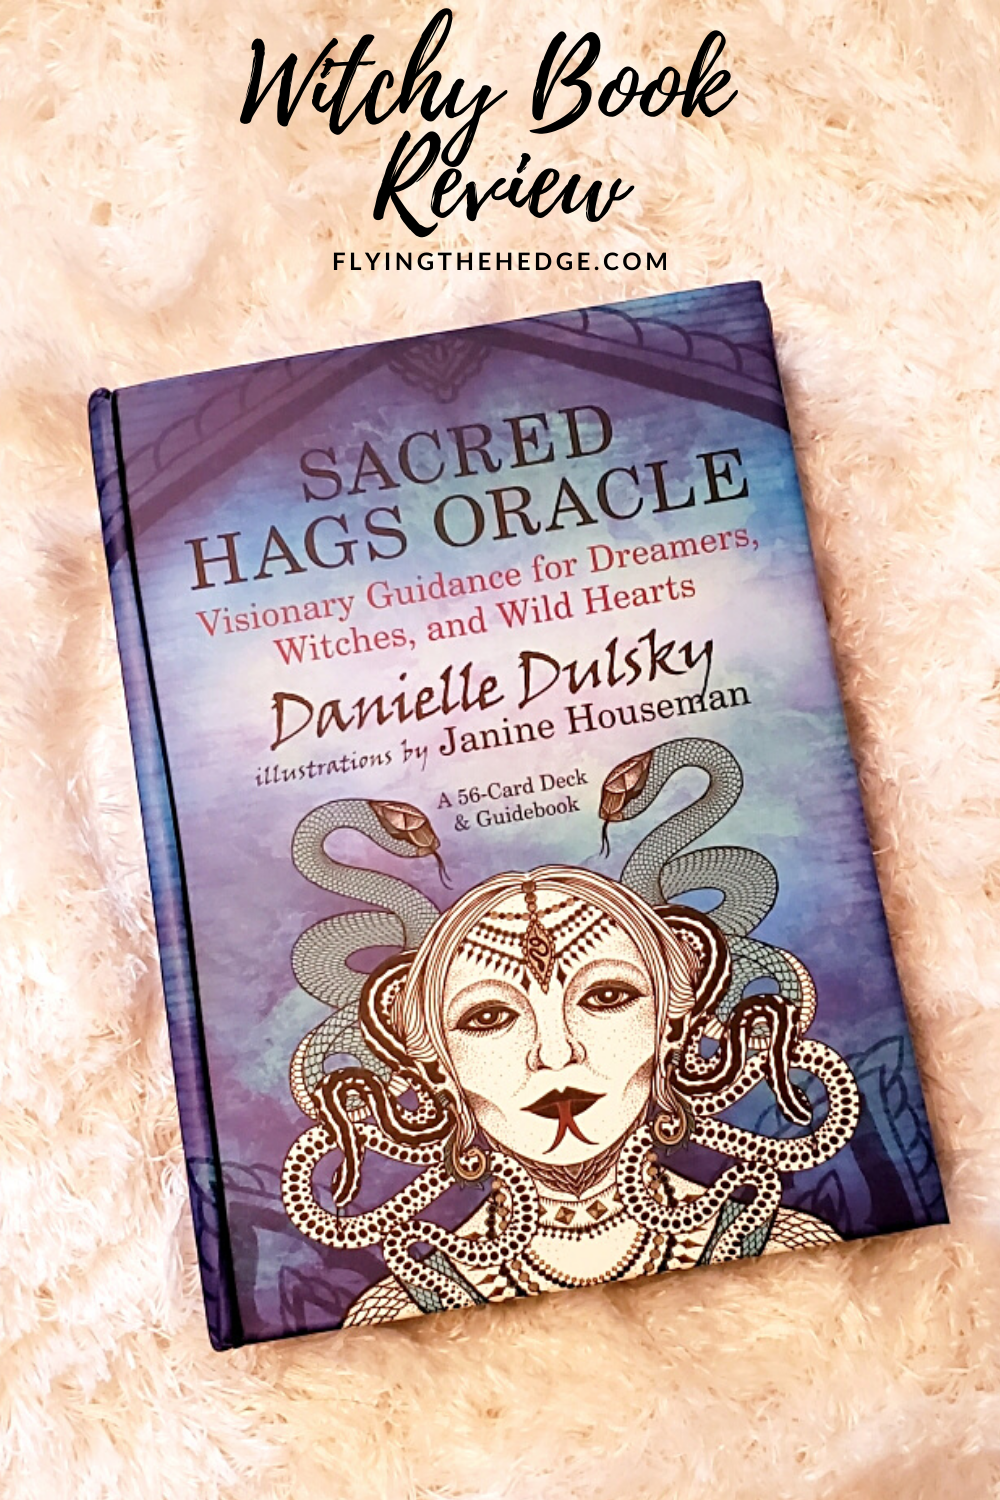 oracle cards, divination, hag, holy wild, dulsky, pagan, witch, witchy, occult, wicca, wiccan, neopagan, witchcraft